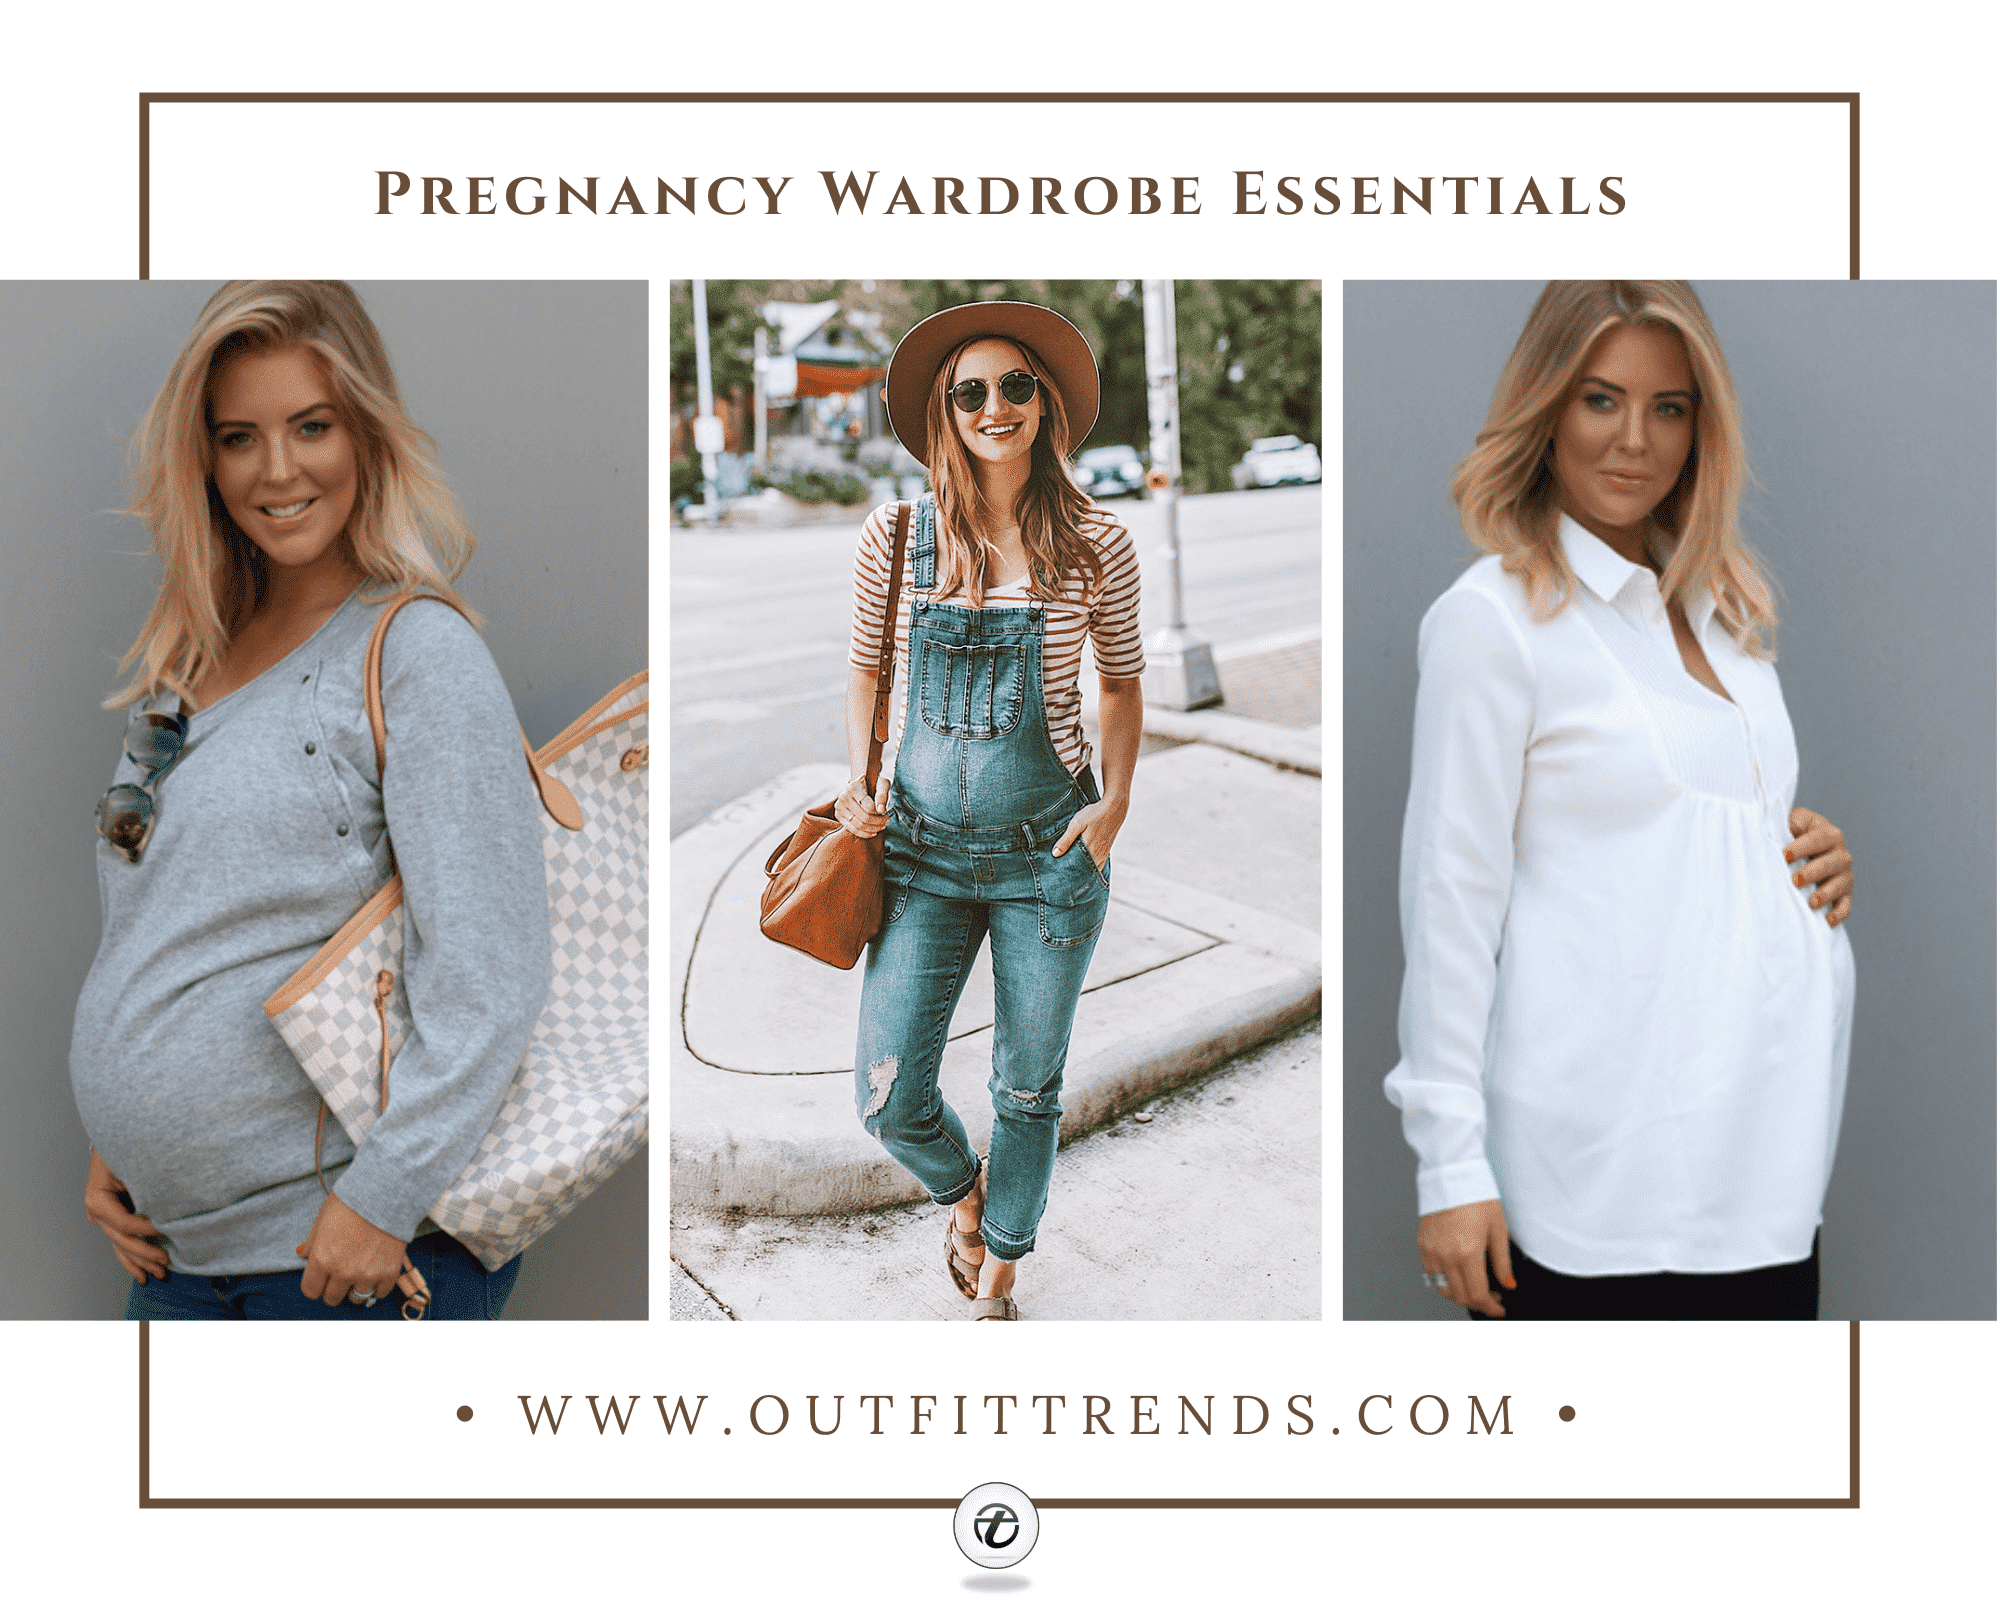 Outfits for Pregnant Women – 26 Best Maternity Outfit Ideas